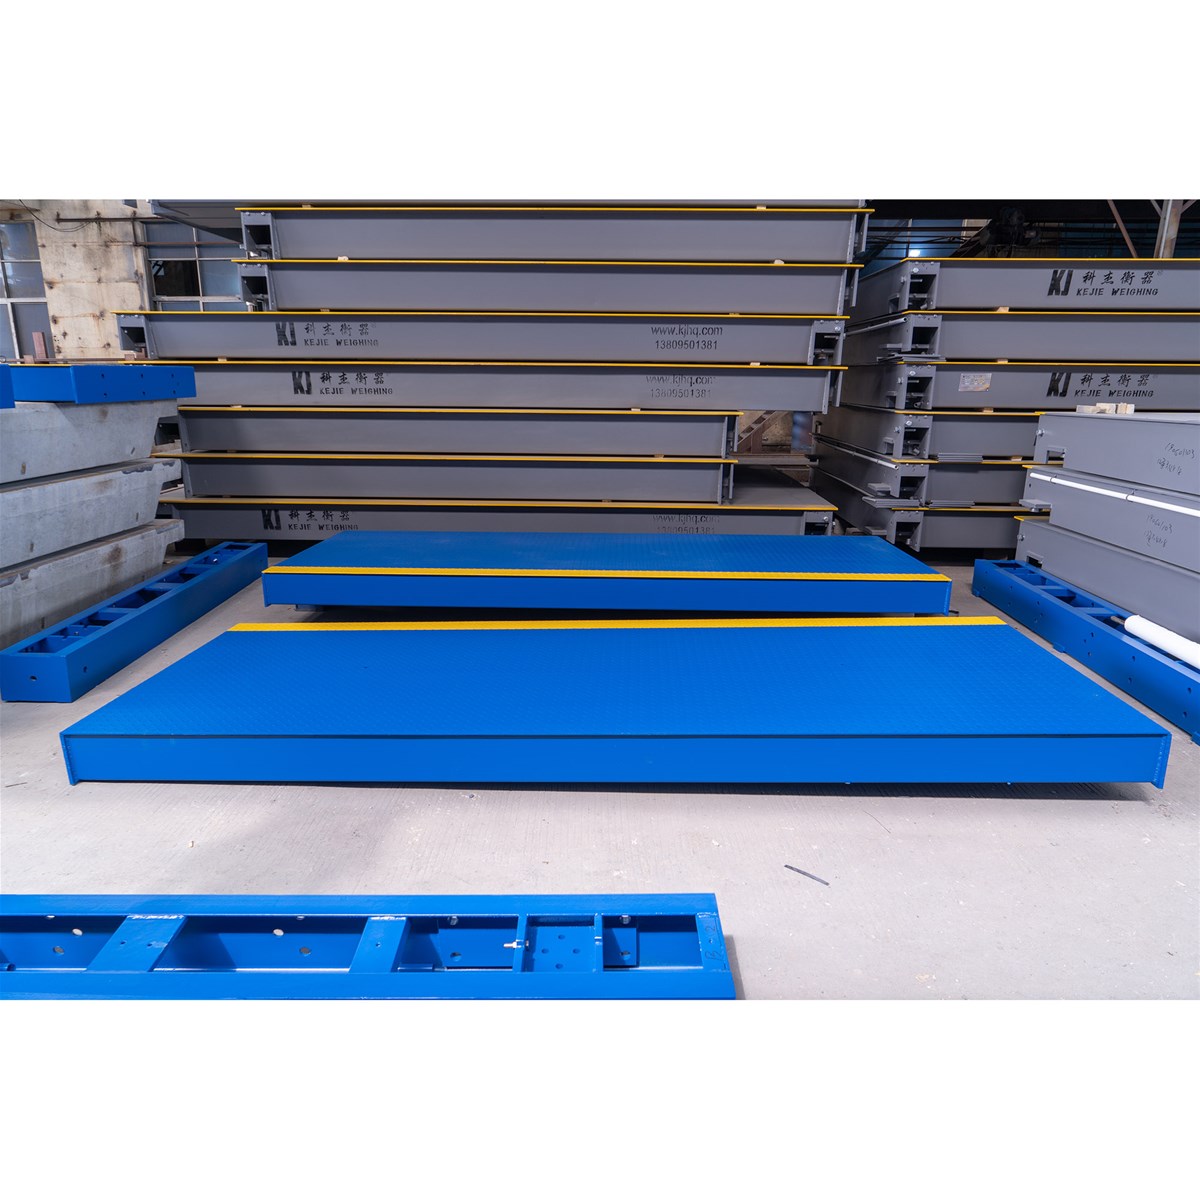 Digital Weighing Scale Heavy Duty Weighbridge for 60t